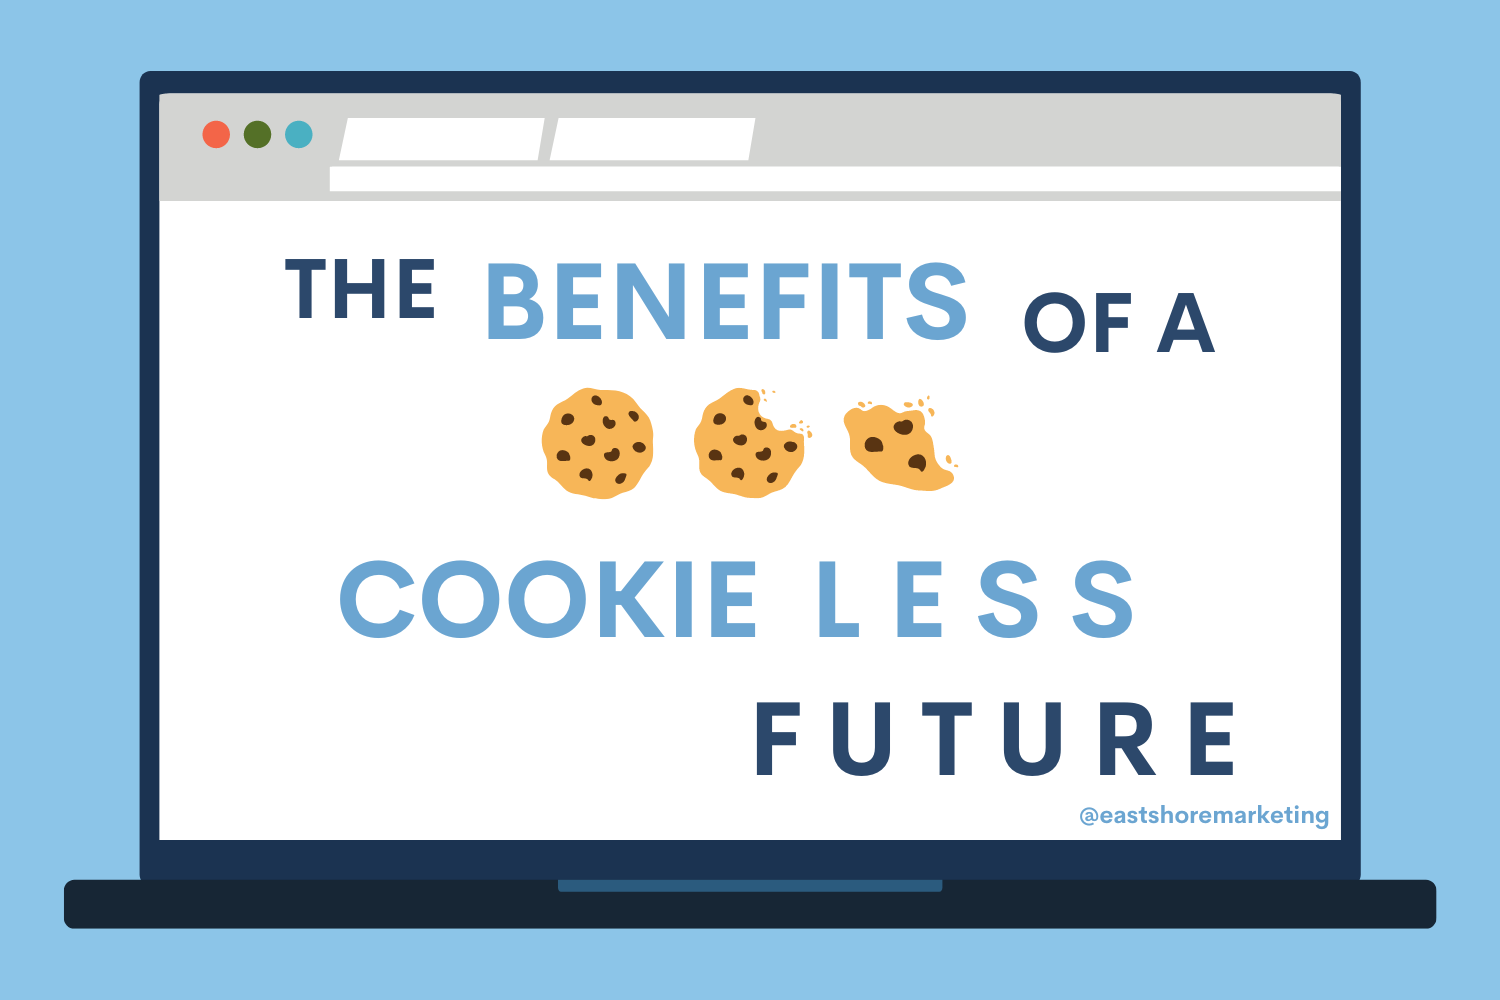 Computer screen with cookies image.